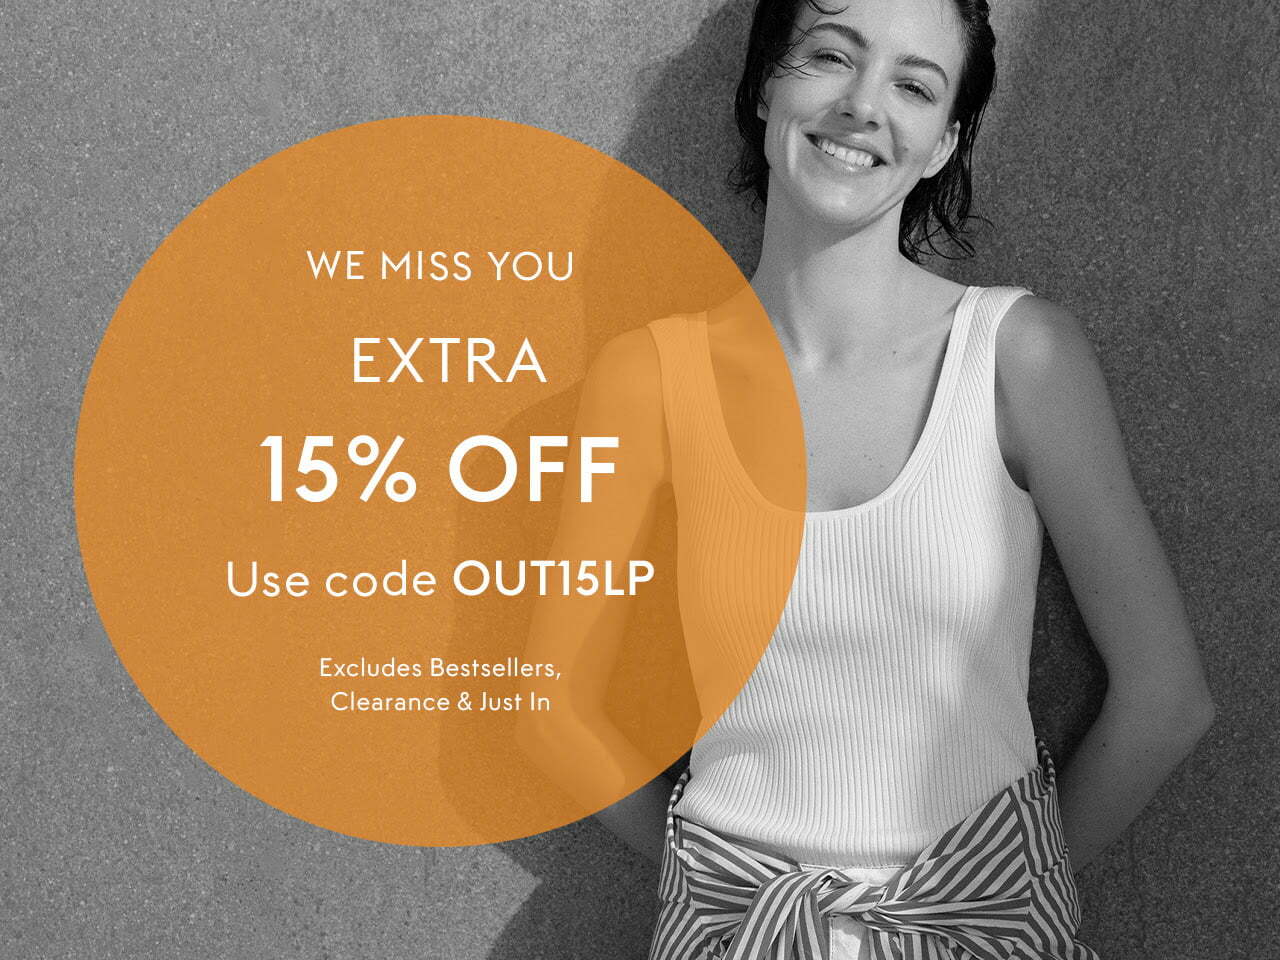 Extra 15% off at The Outnet